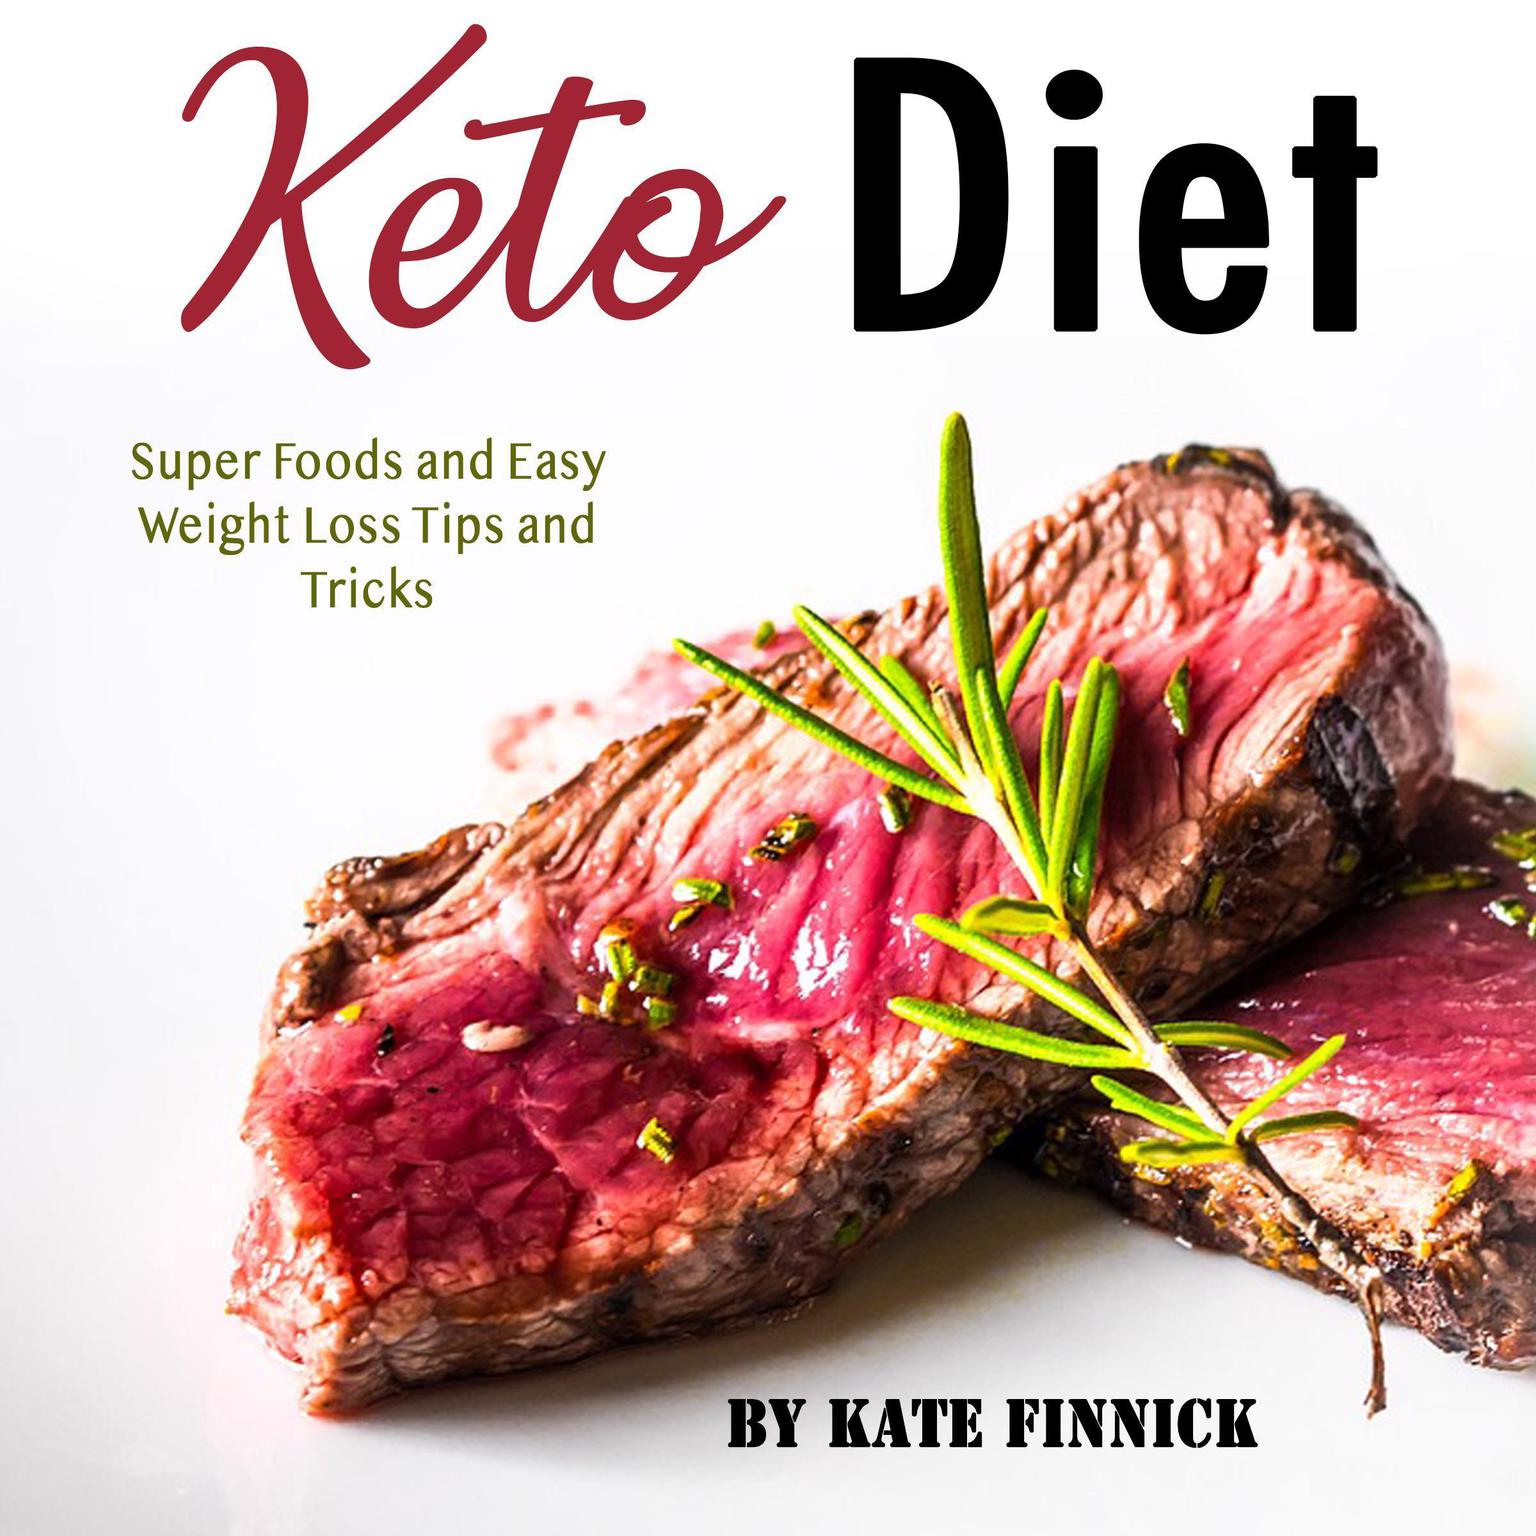 Keto Diet: Super Foods and Easy Weight Loss Tips and Tricks Audiobook, by Kate Finnick